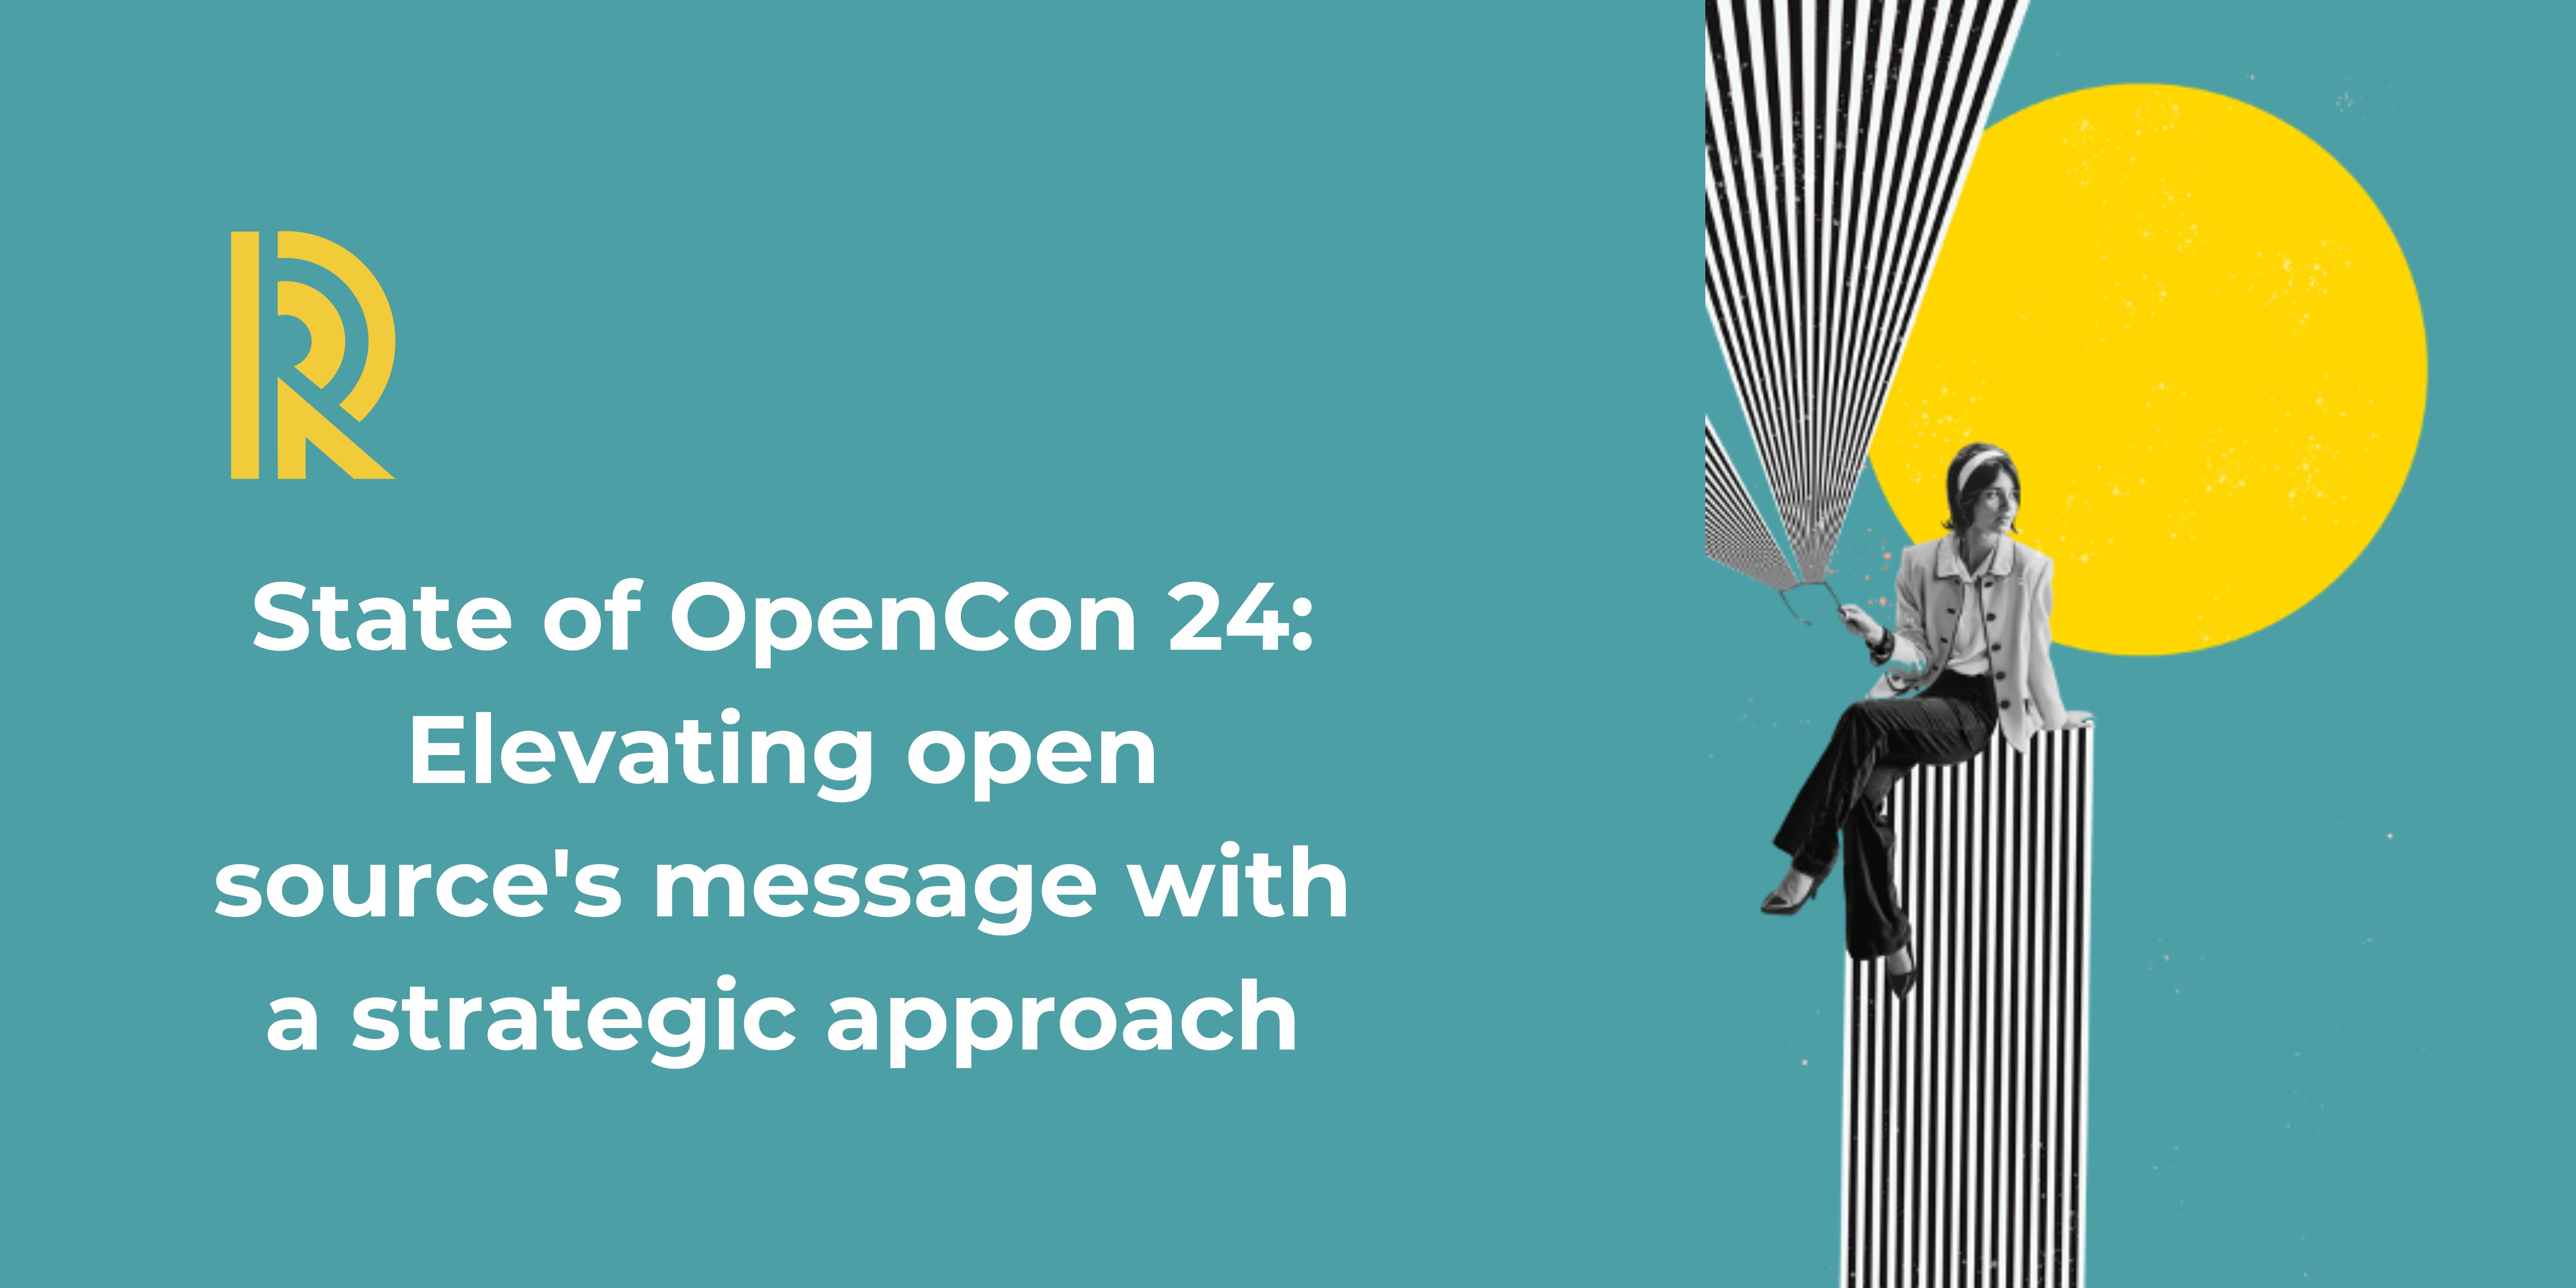 State of OpenCon 24: Elevating open source's message with a strategic approach